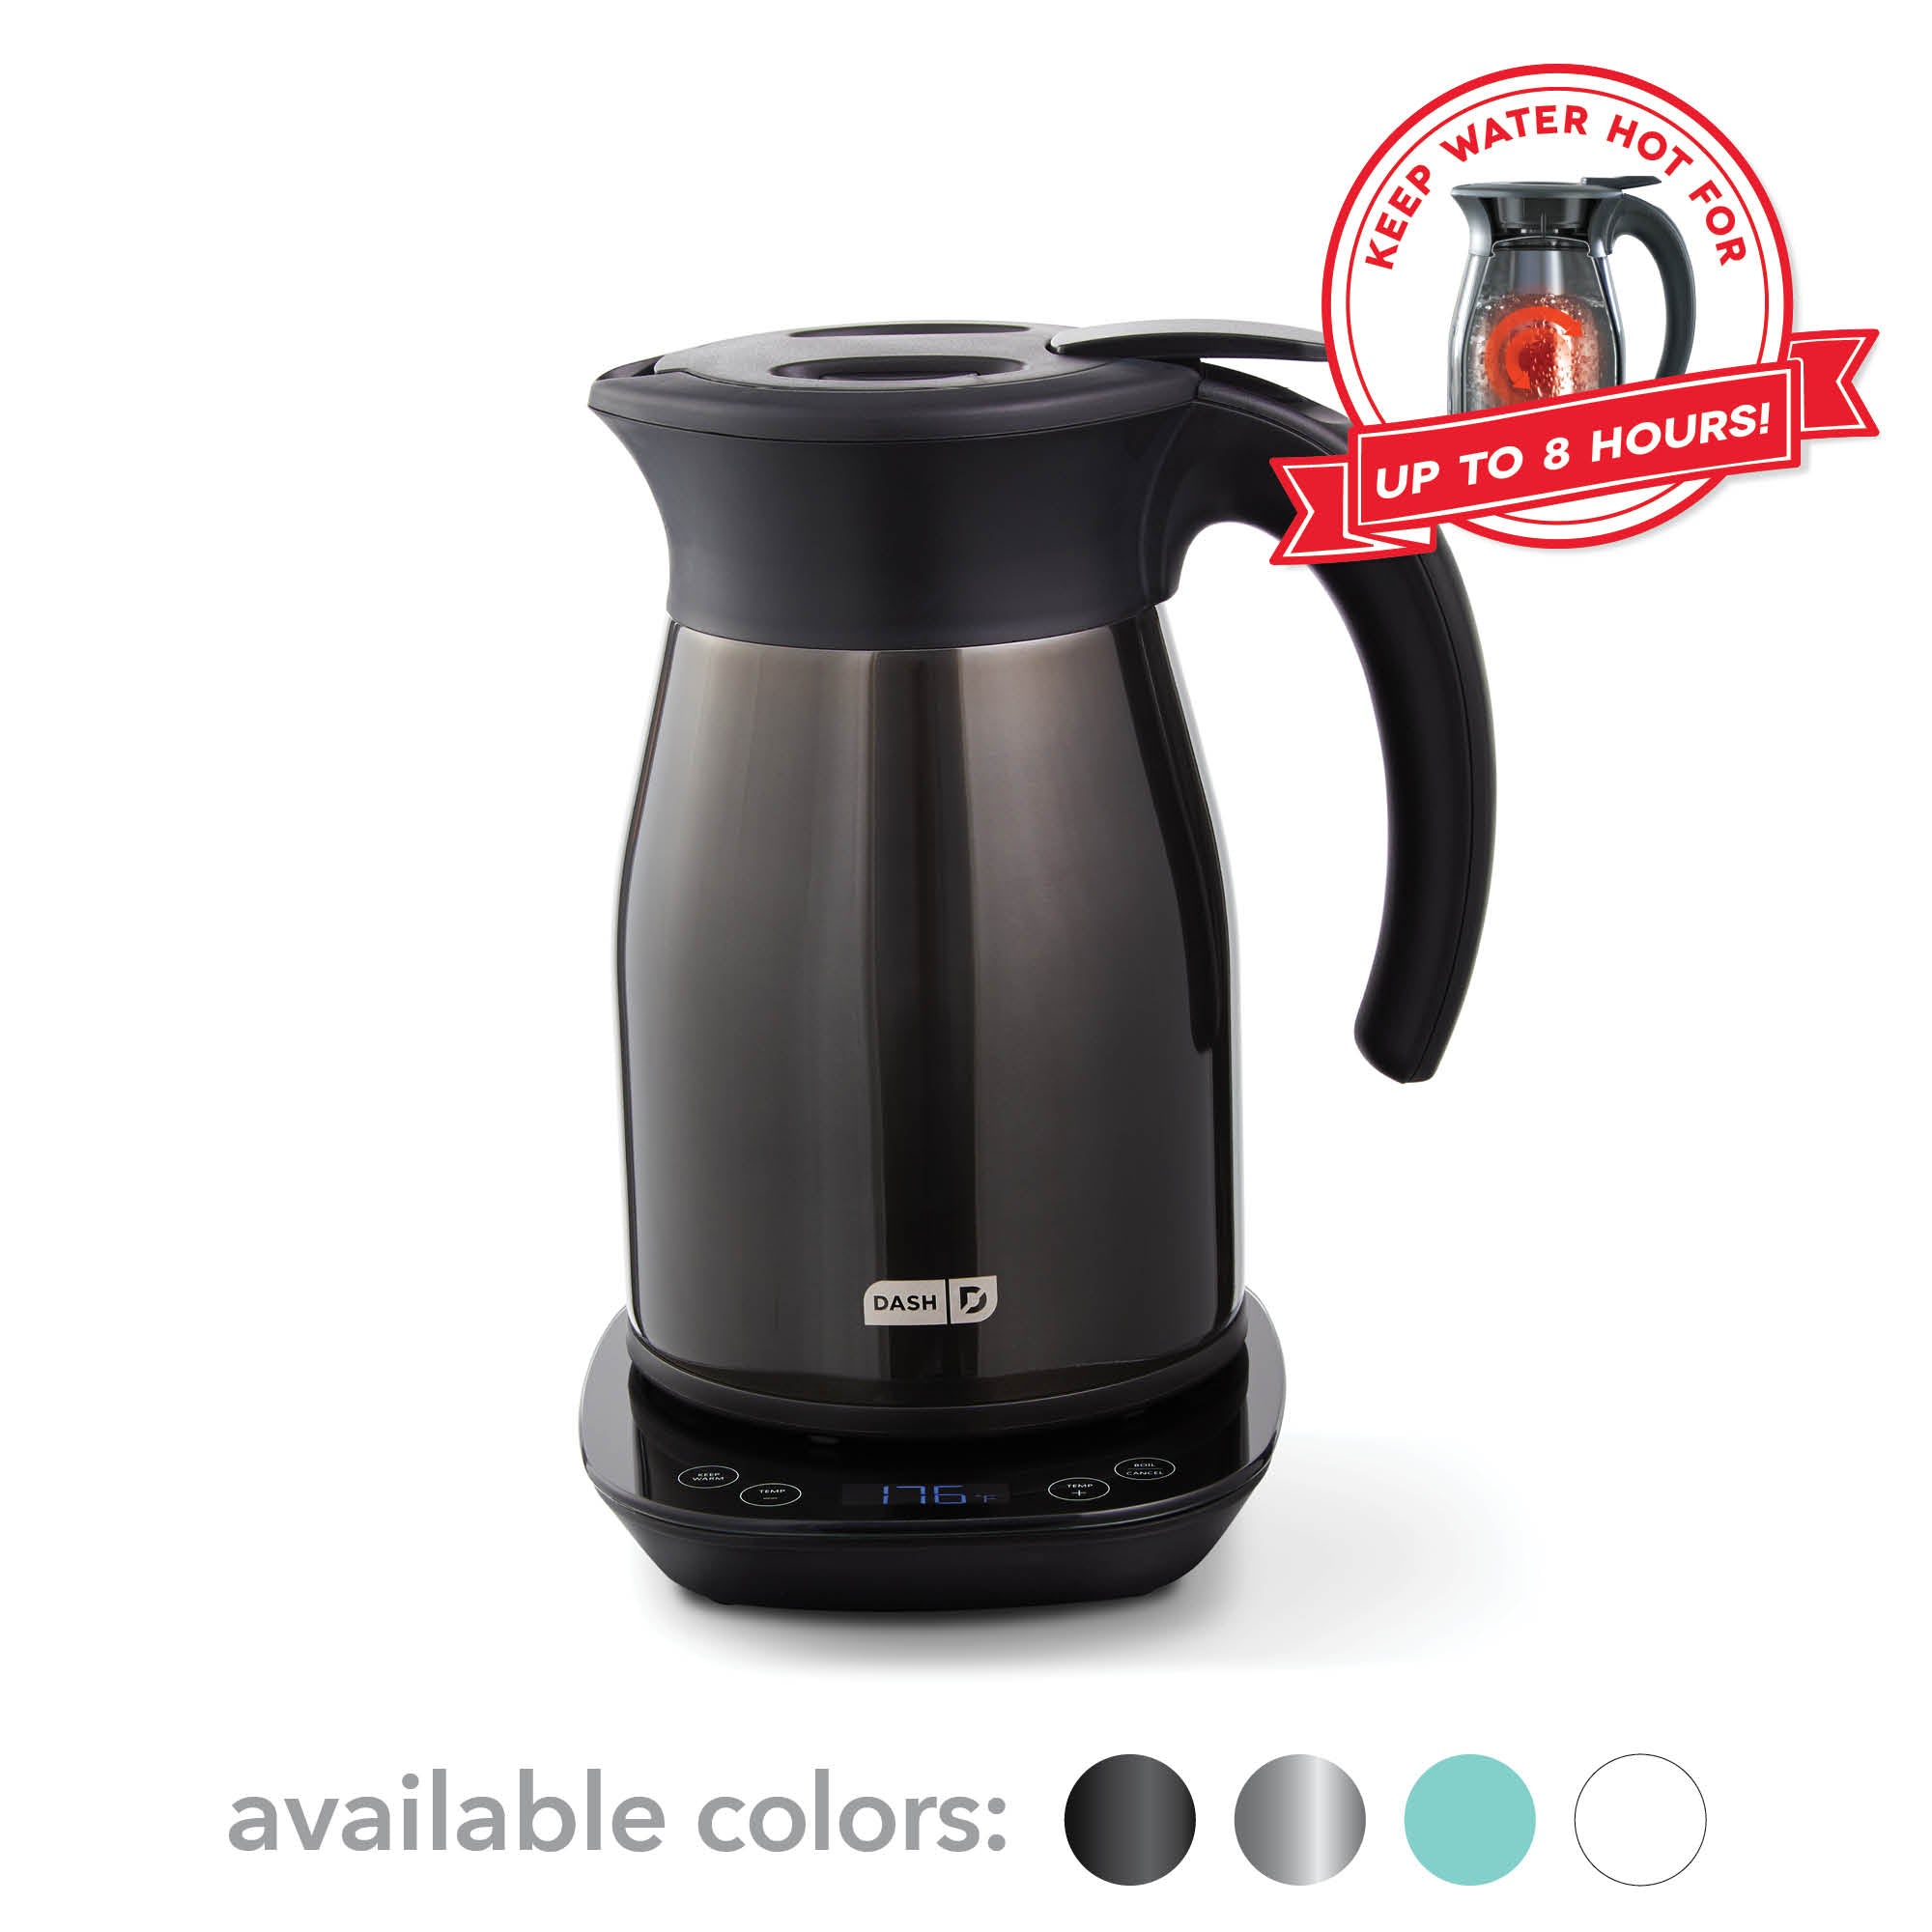 Dash DEK001RD Electric Kettle + Water Heater with Rapid Boil, Cool